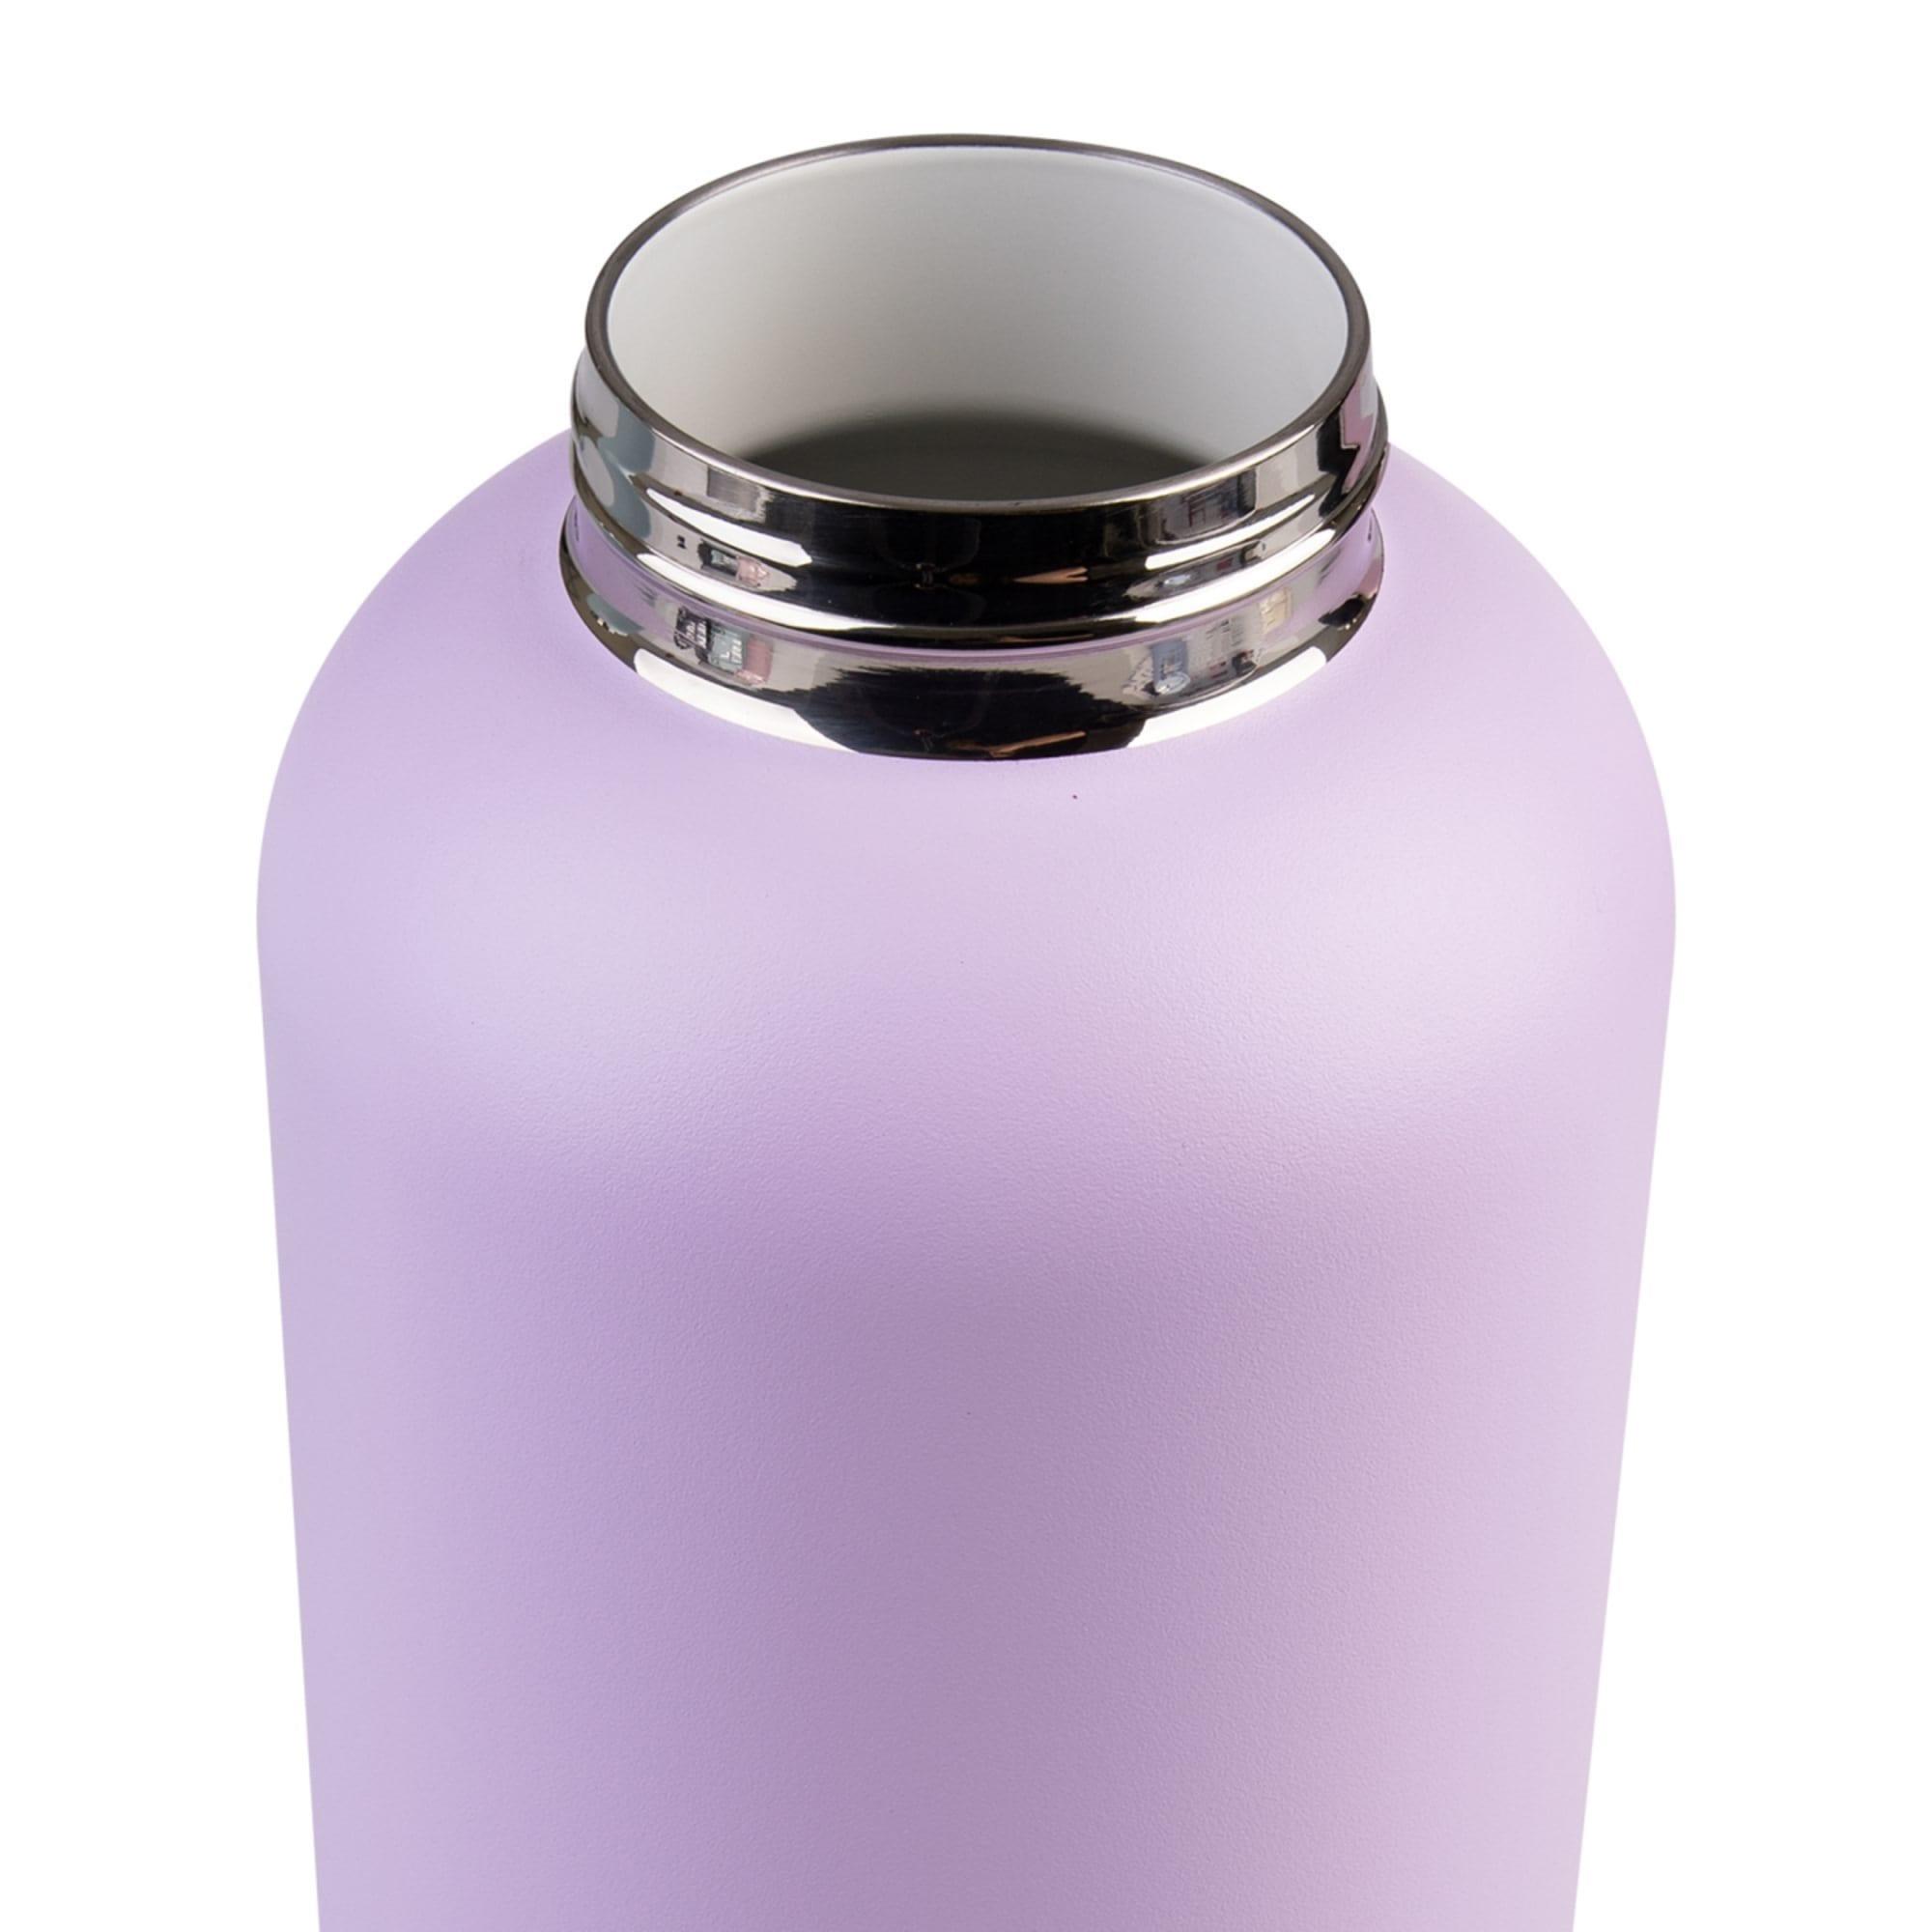 Oasis Moda Triple Wall Insulated Drink Bottle 1.5L Orchid Image 9